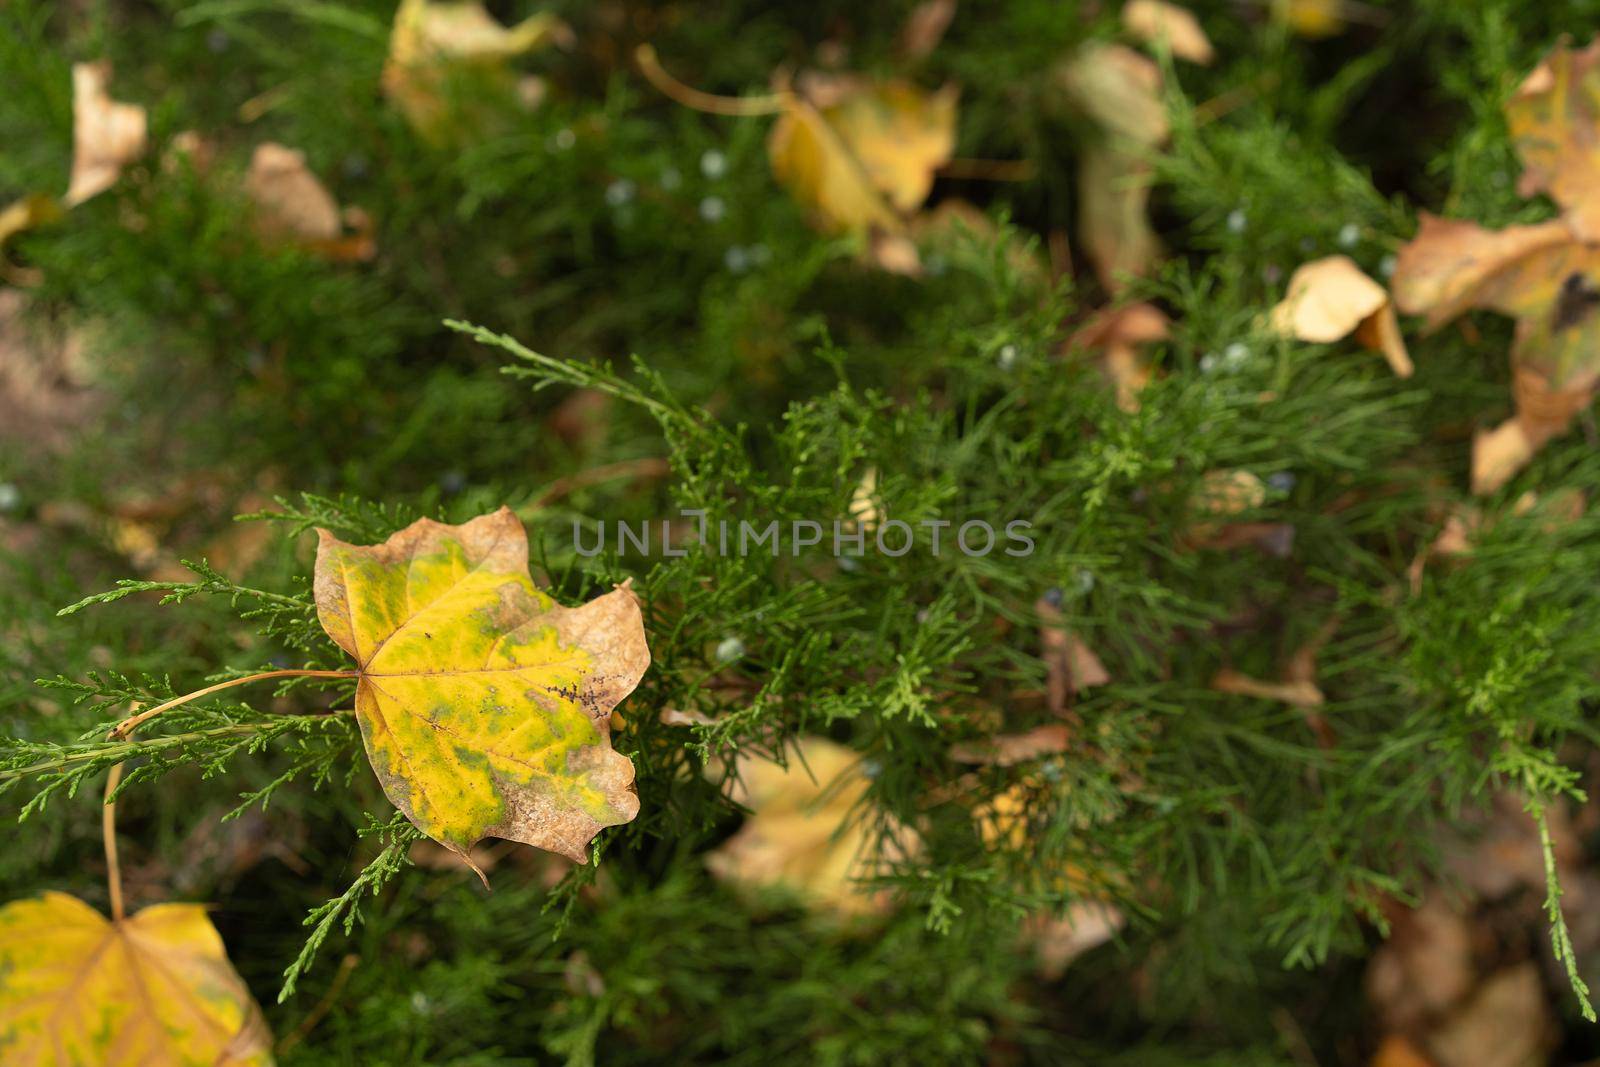 Thuja western Smaragd or coniferous trees with lots of yellow fallen yellow leaves from the trees on it. Autumn background. Selective focus on leaf in foreground.